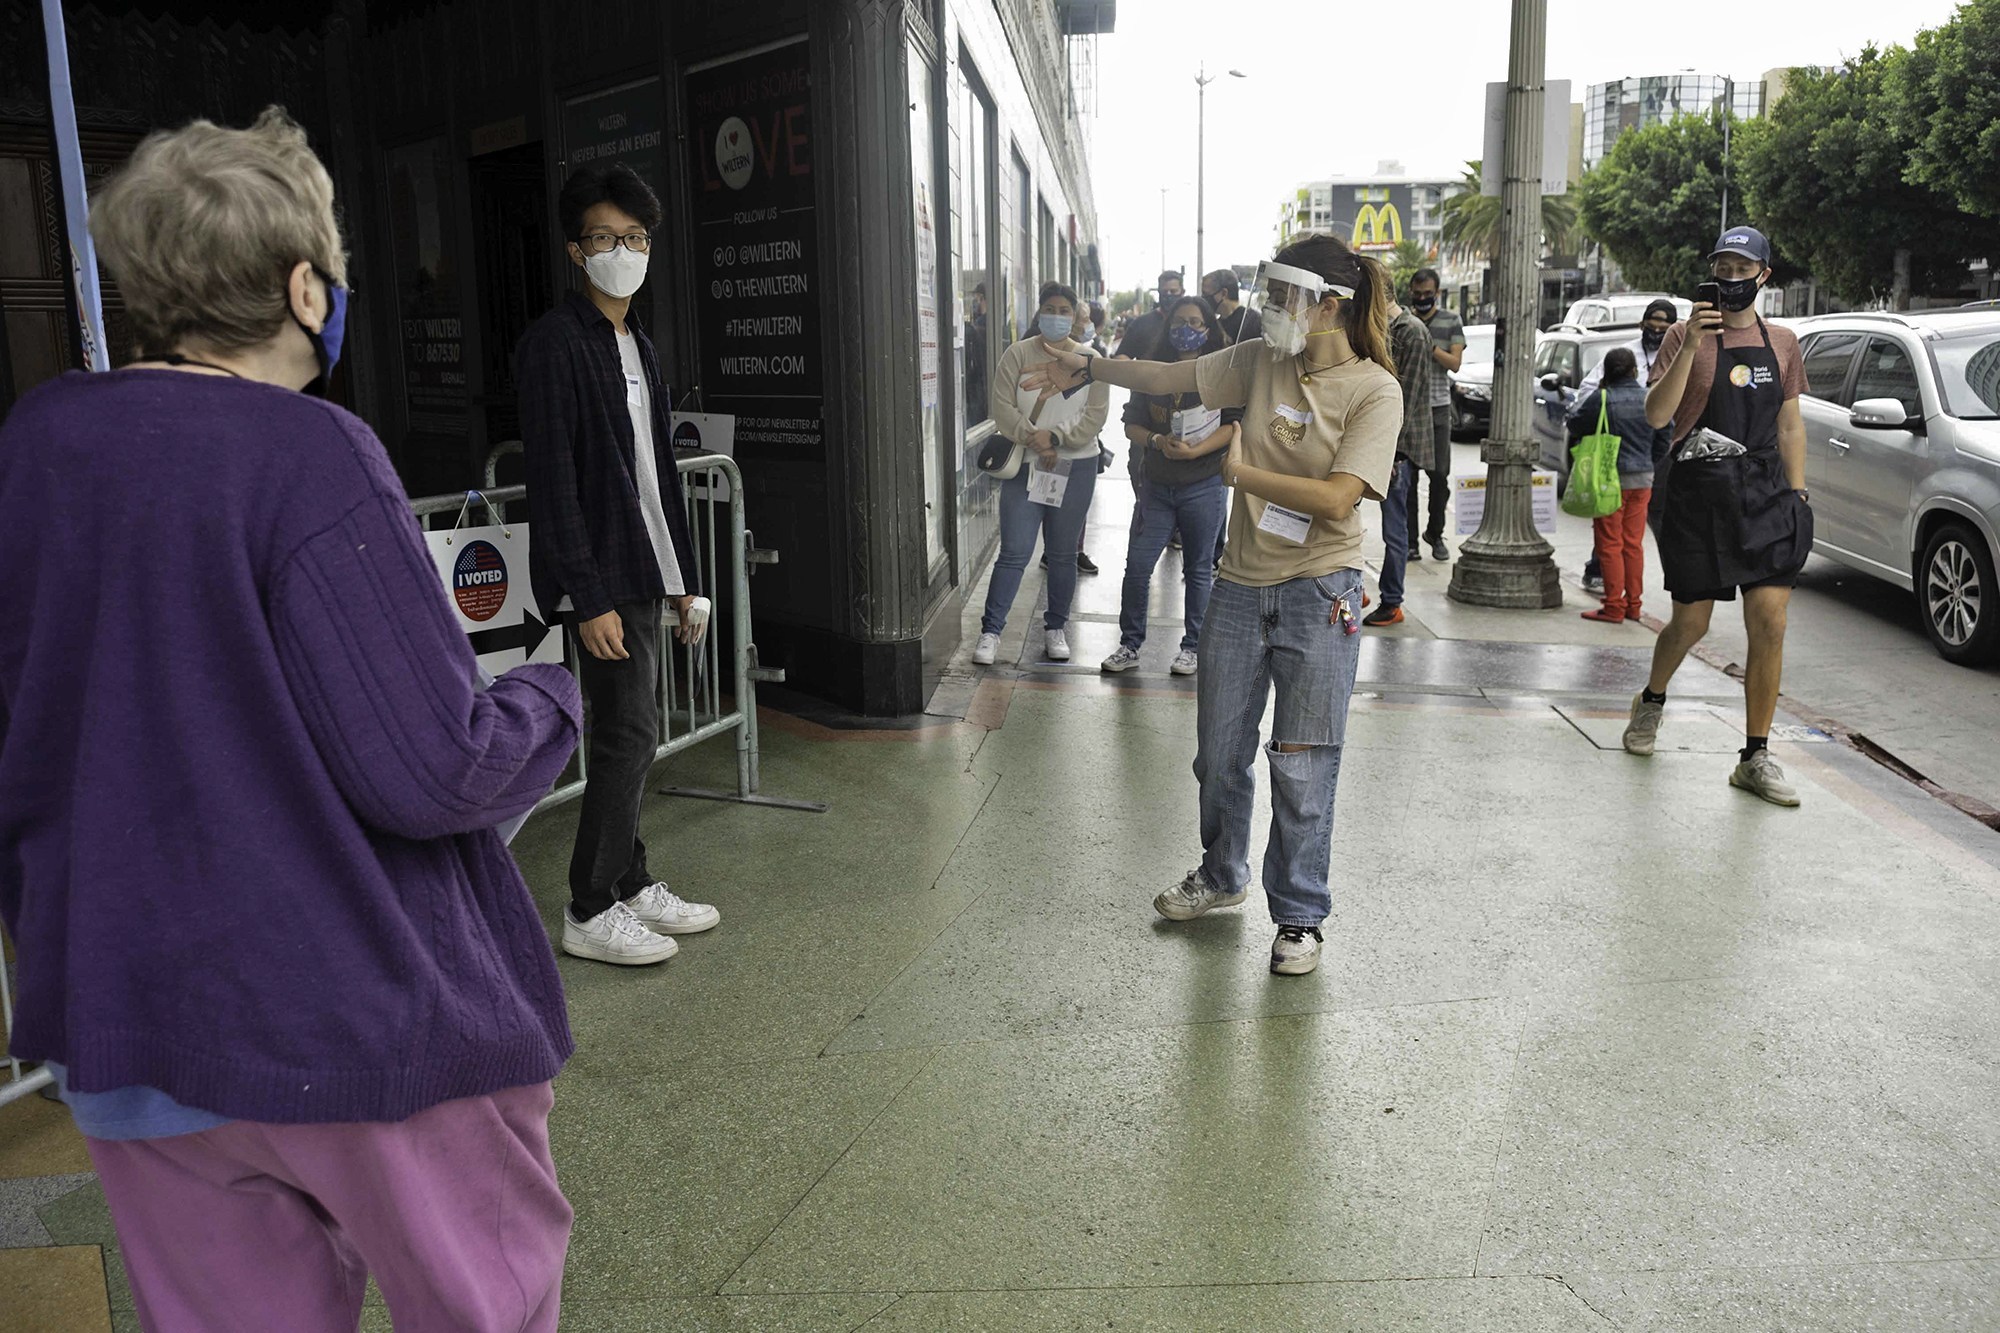 A group of people wearing masks stand and maintain social distance in line on a sidewalk. An individual in a cap and mask appears to be directing the crowd. The background includes storefronts, a McDonald's sign, and a few pedestrians walking by, capturing the essence of Berkeley Journalism's street scene.